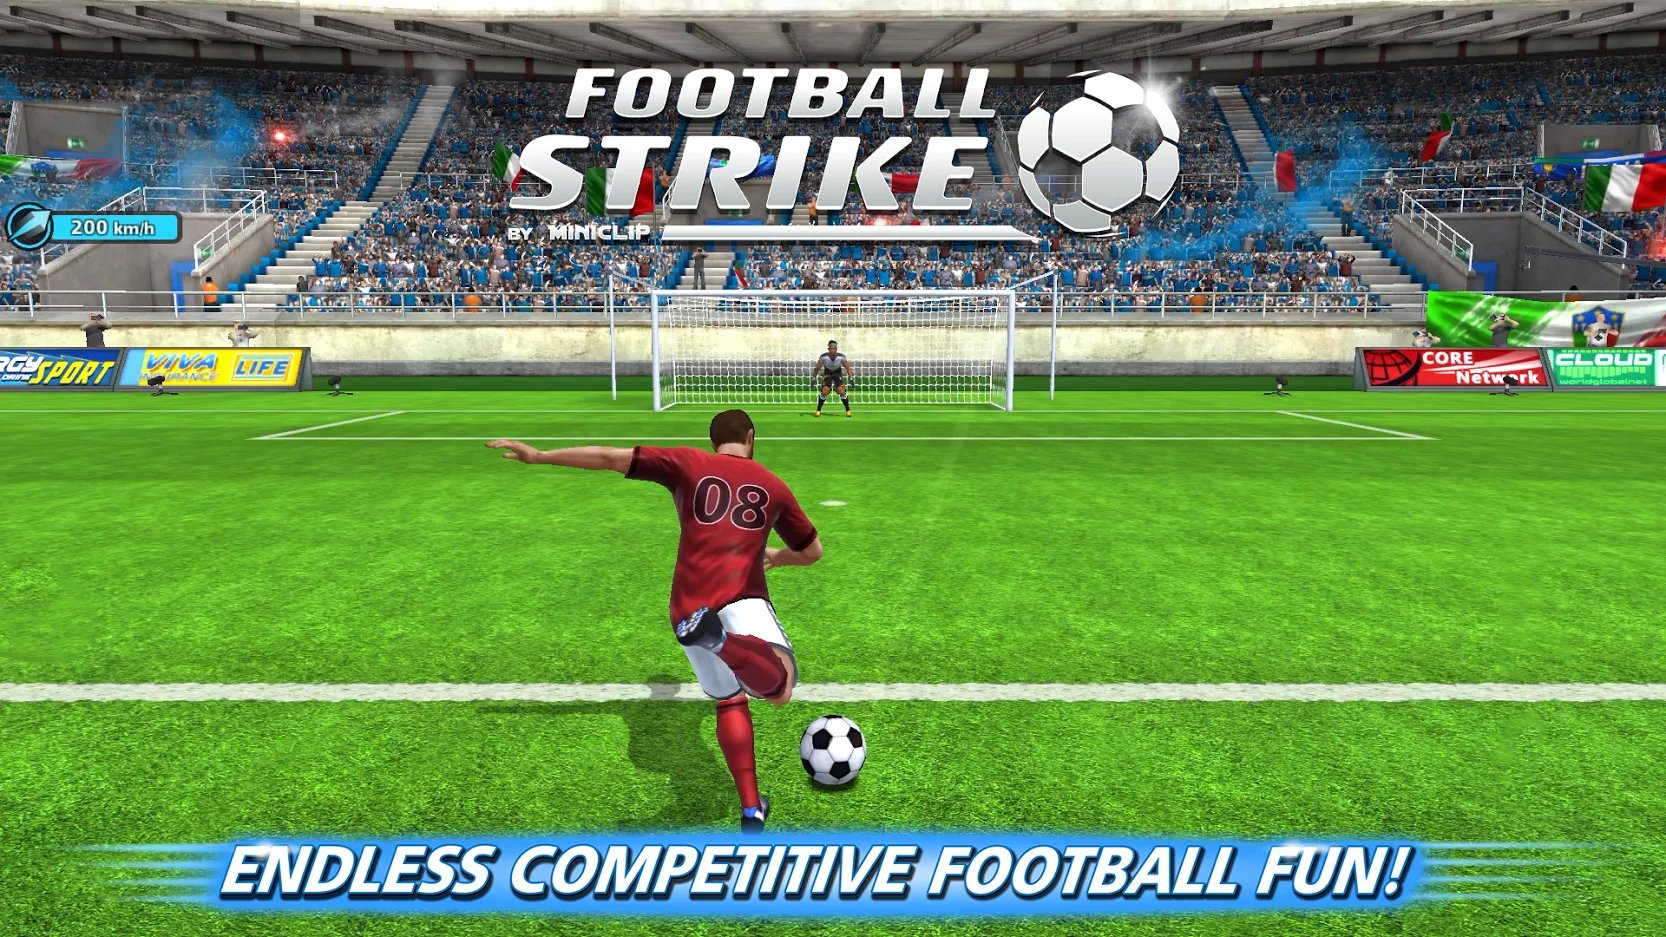 download fifa 12 apk for android free